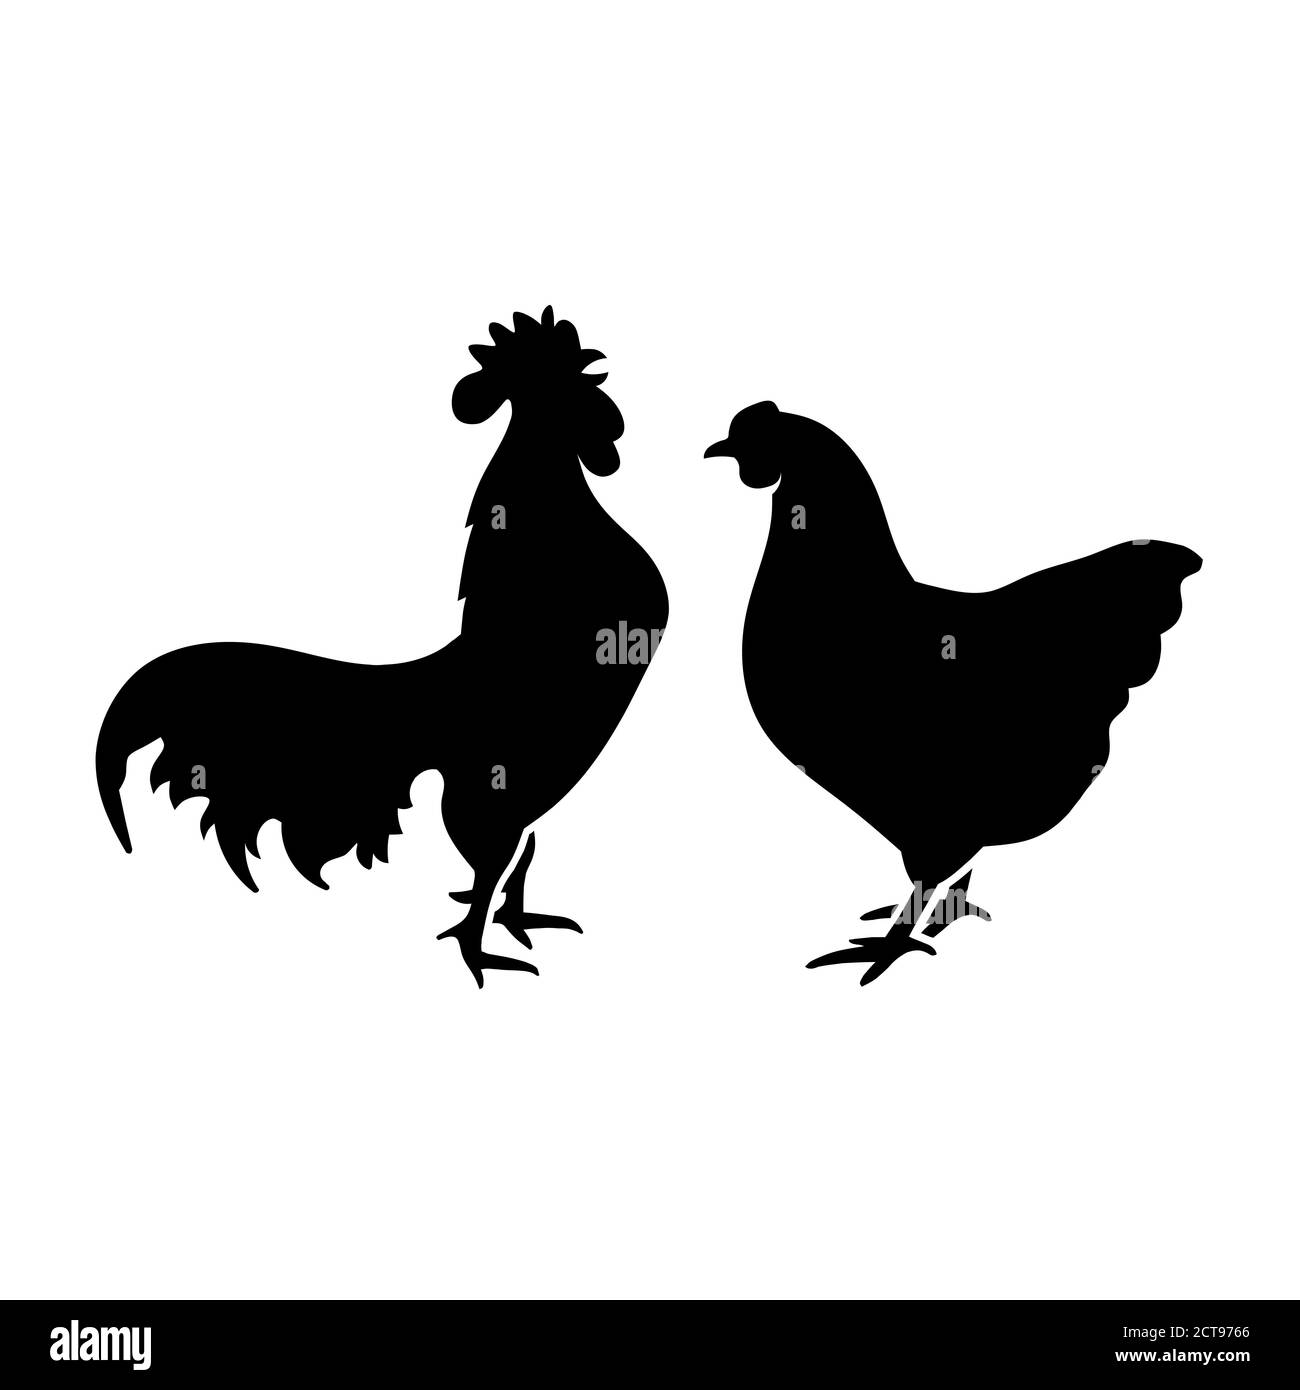 Farm animal silhouette in black on a white background ,chicken Silhouettes isolated on white vector Stock Vector